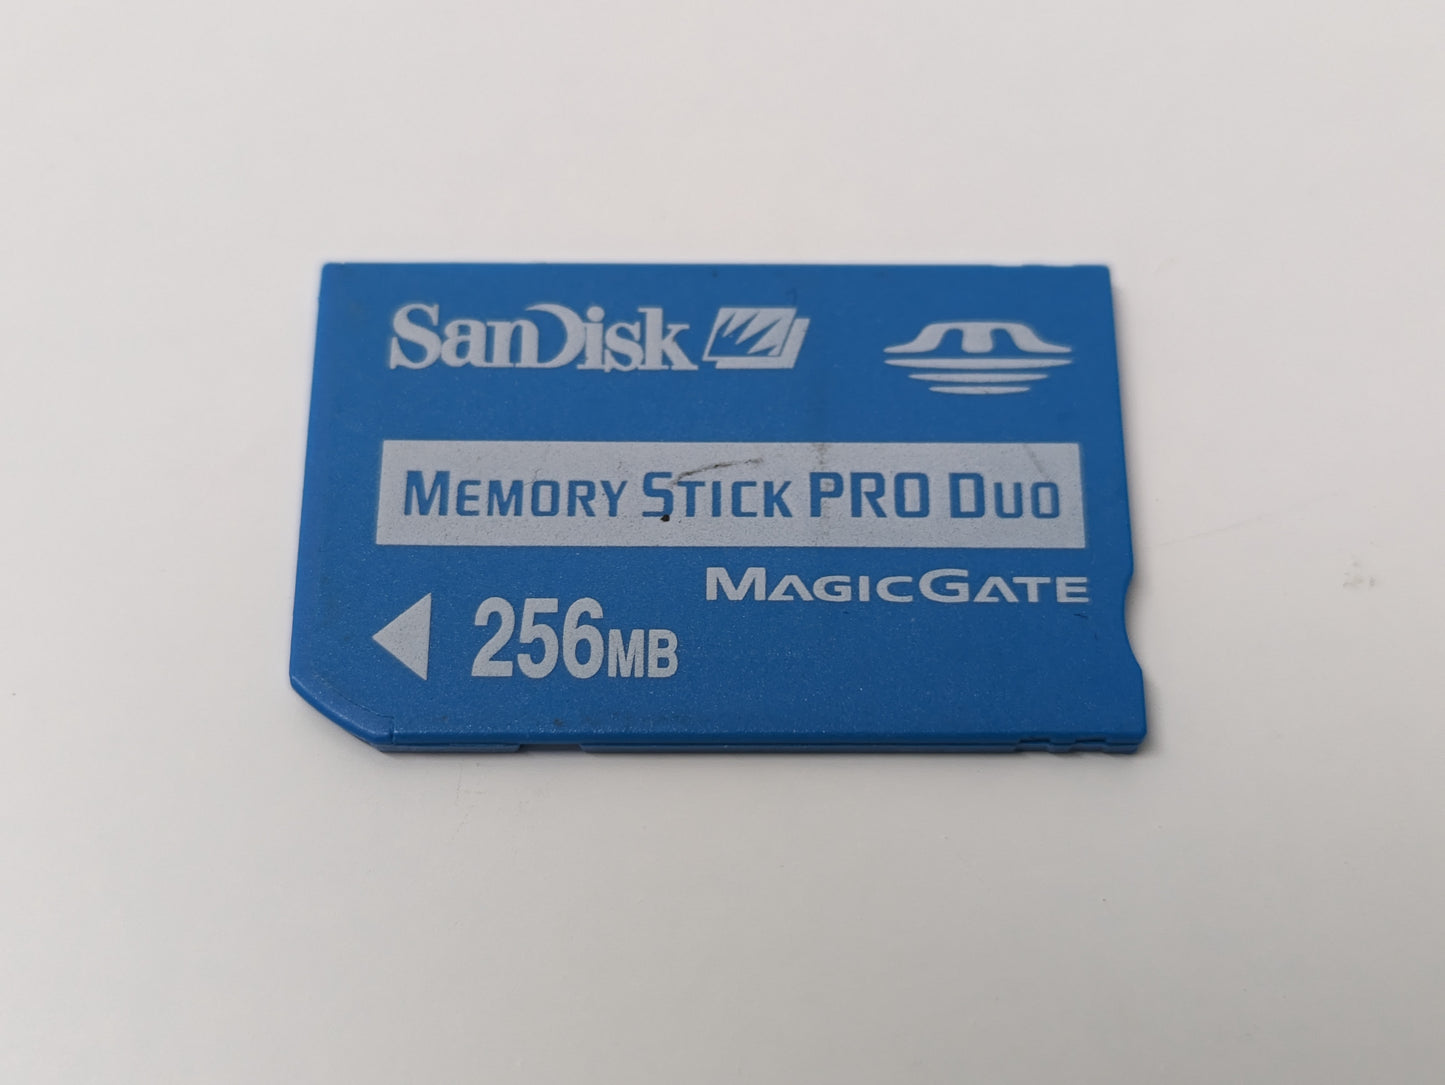 SanDisk 256MB MagicGate Memory Stick for PSP - USED